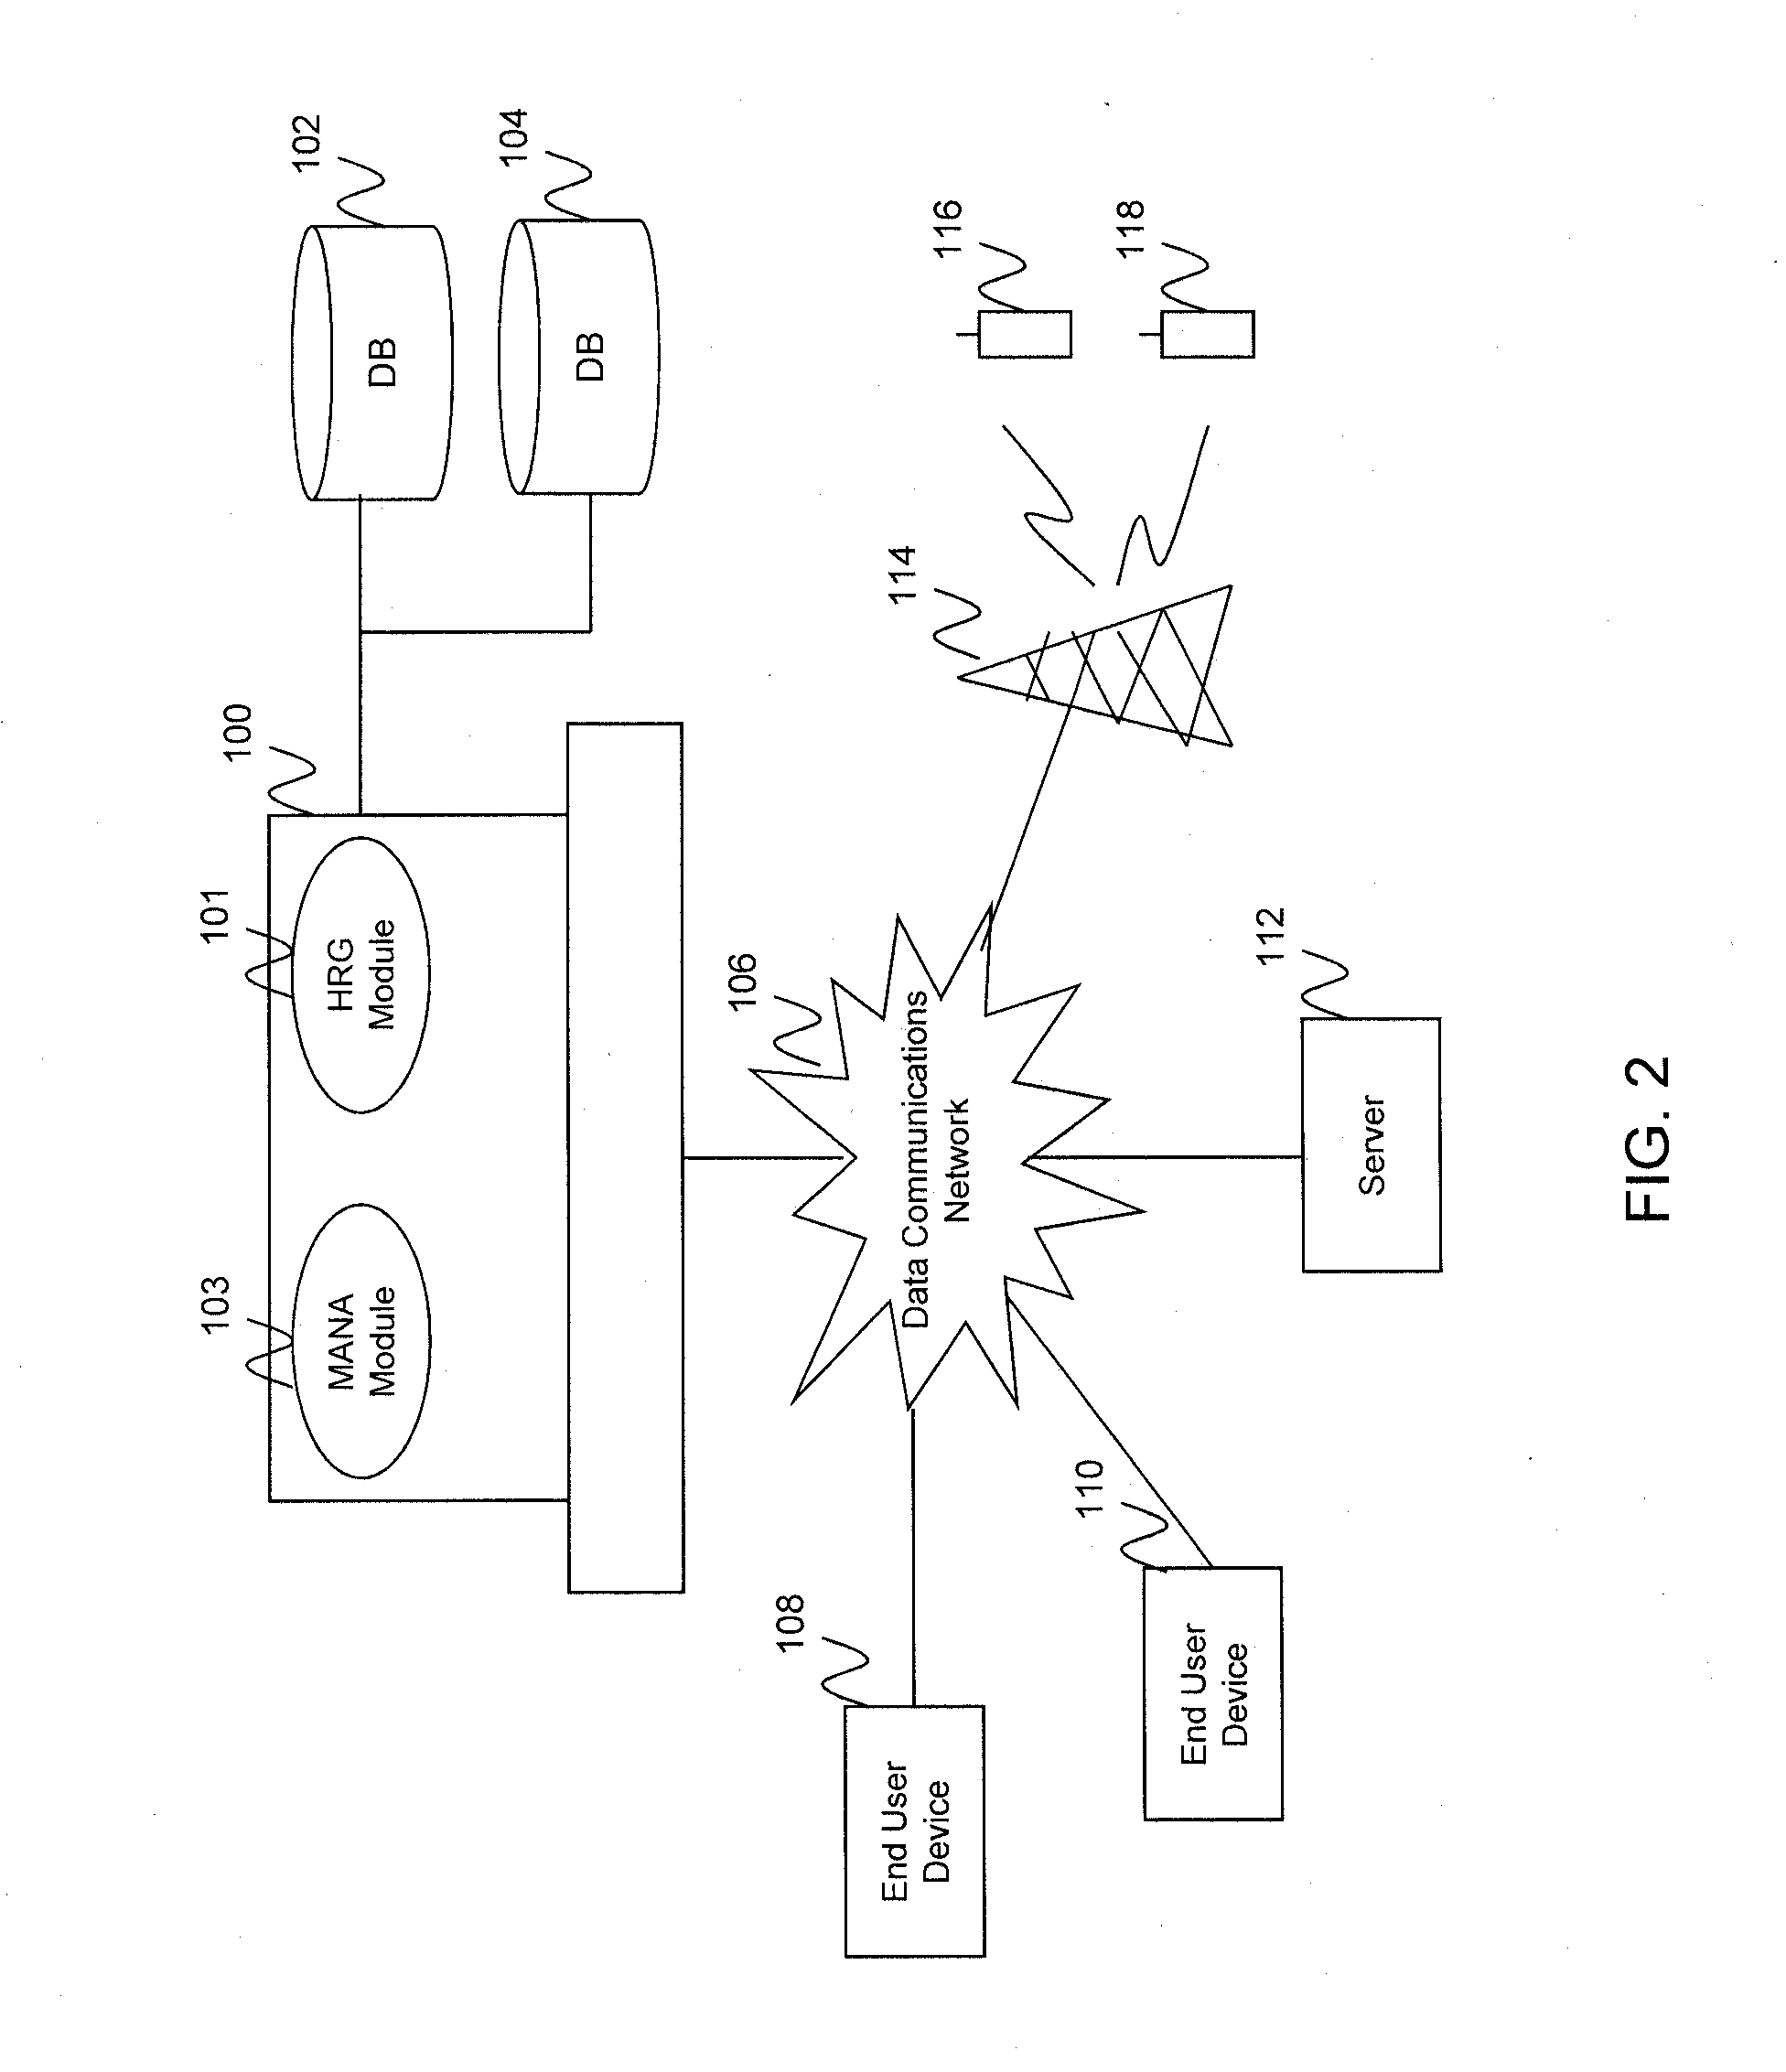 System and method for modeling and analyzing data via hierarchical random graphs